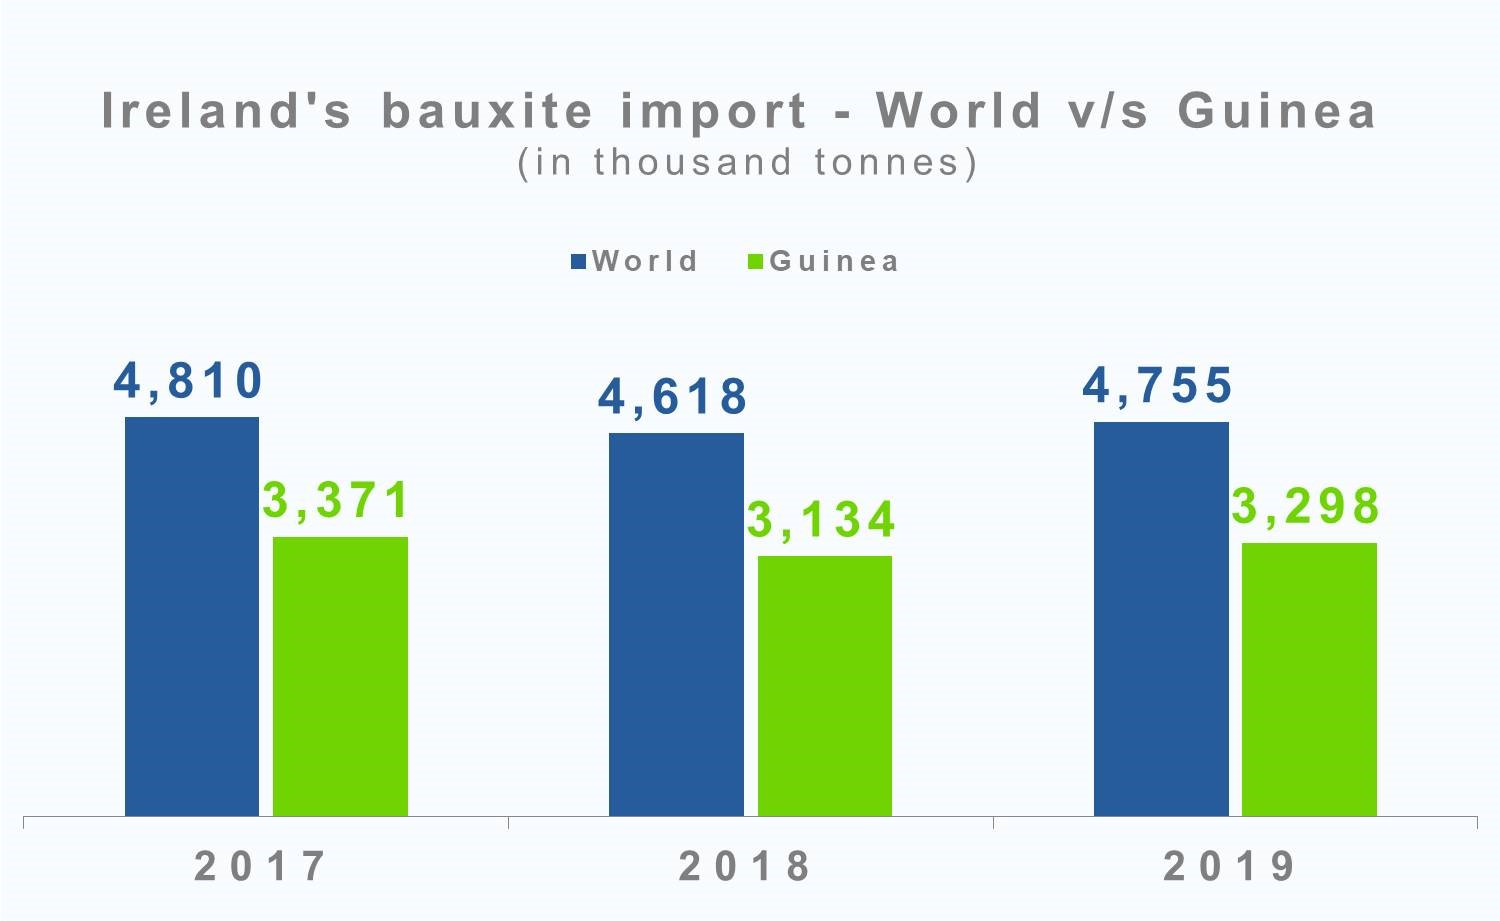 Ireland's total bauxite imports to rise by 3%